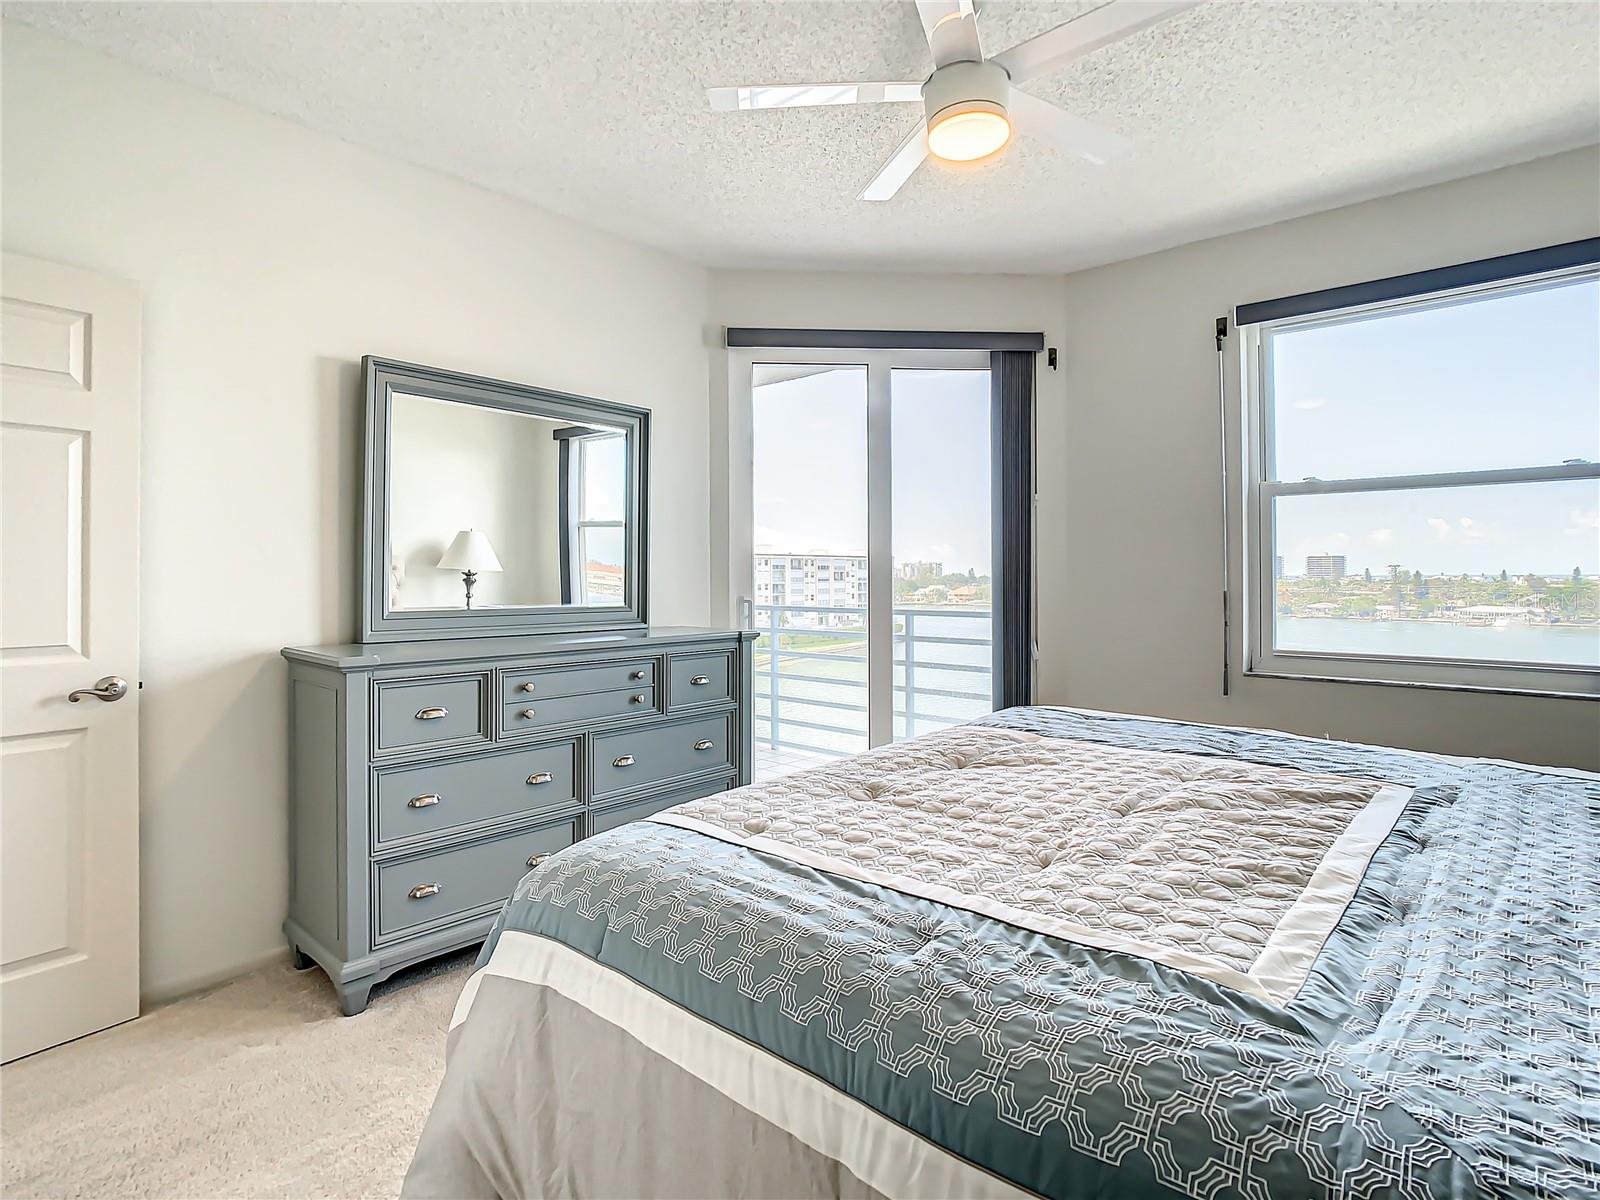 This shows you the nice view you will have from your main bedroom looking out to the water.